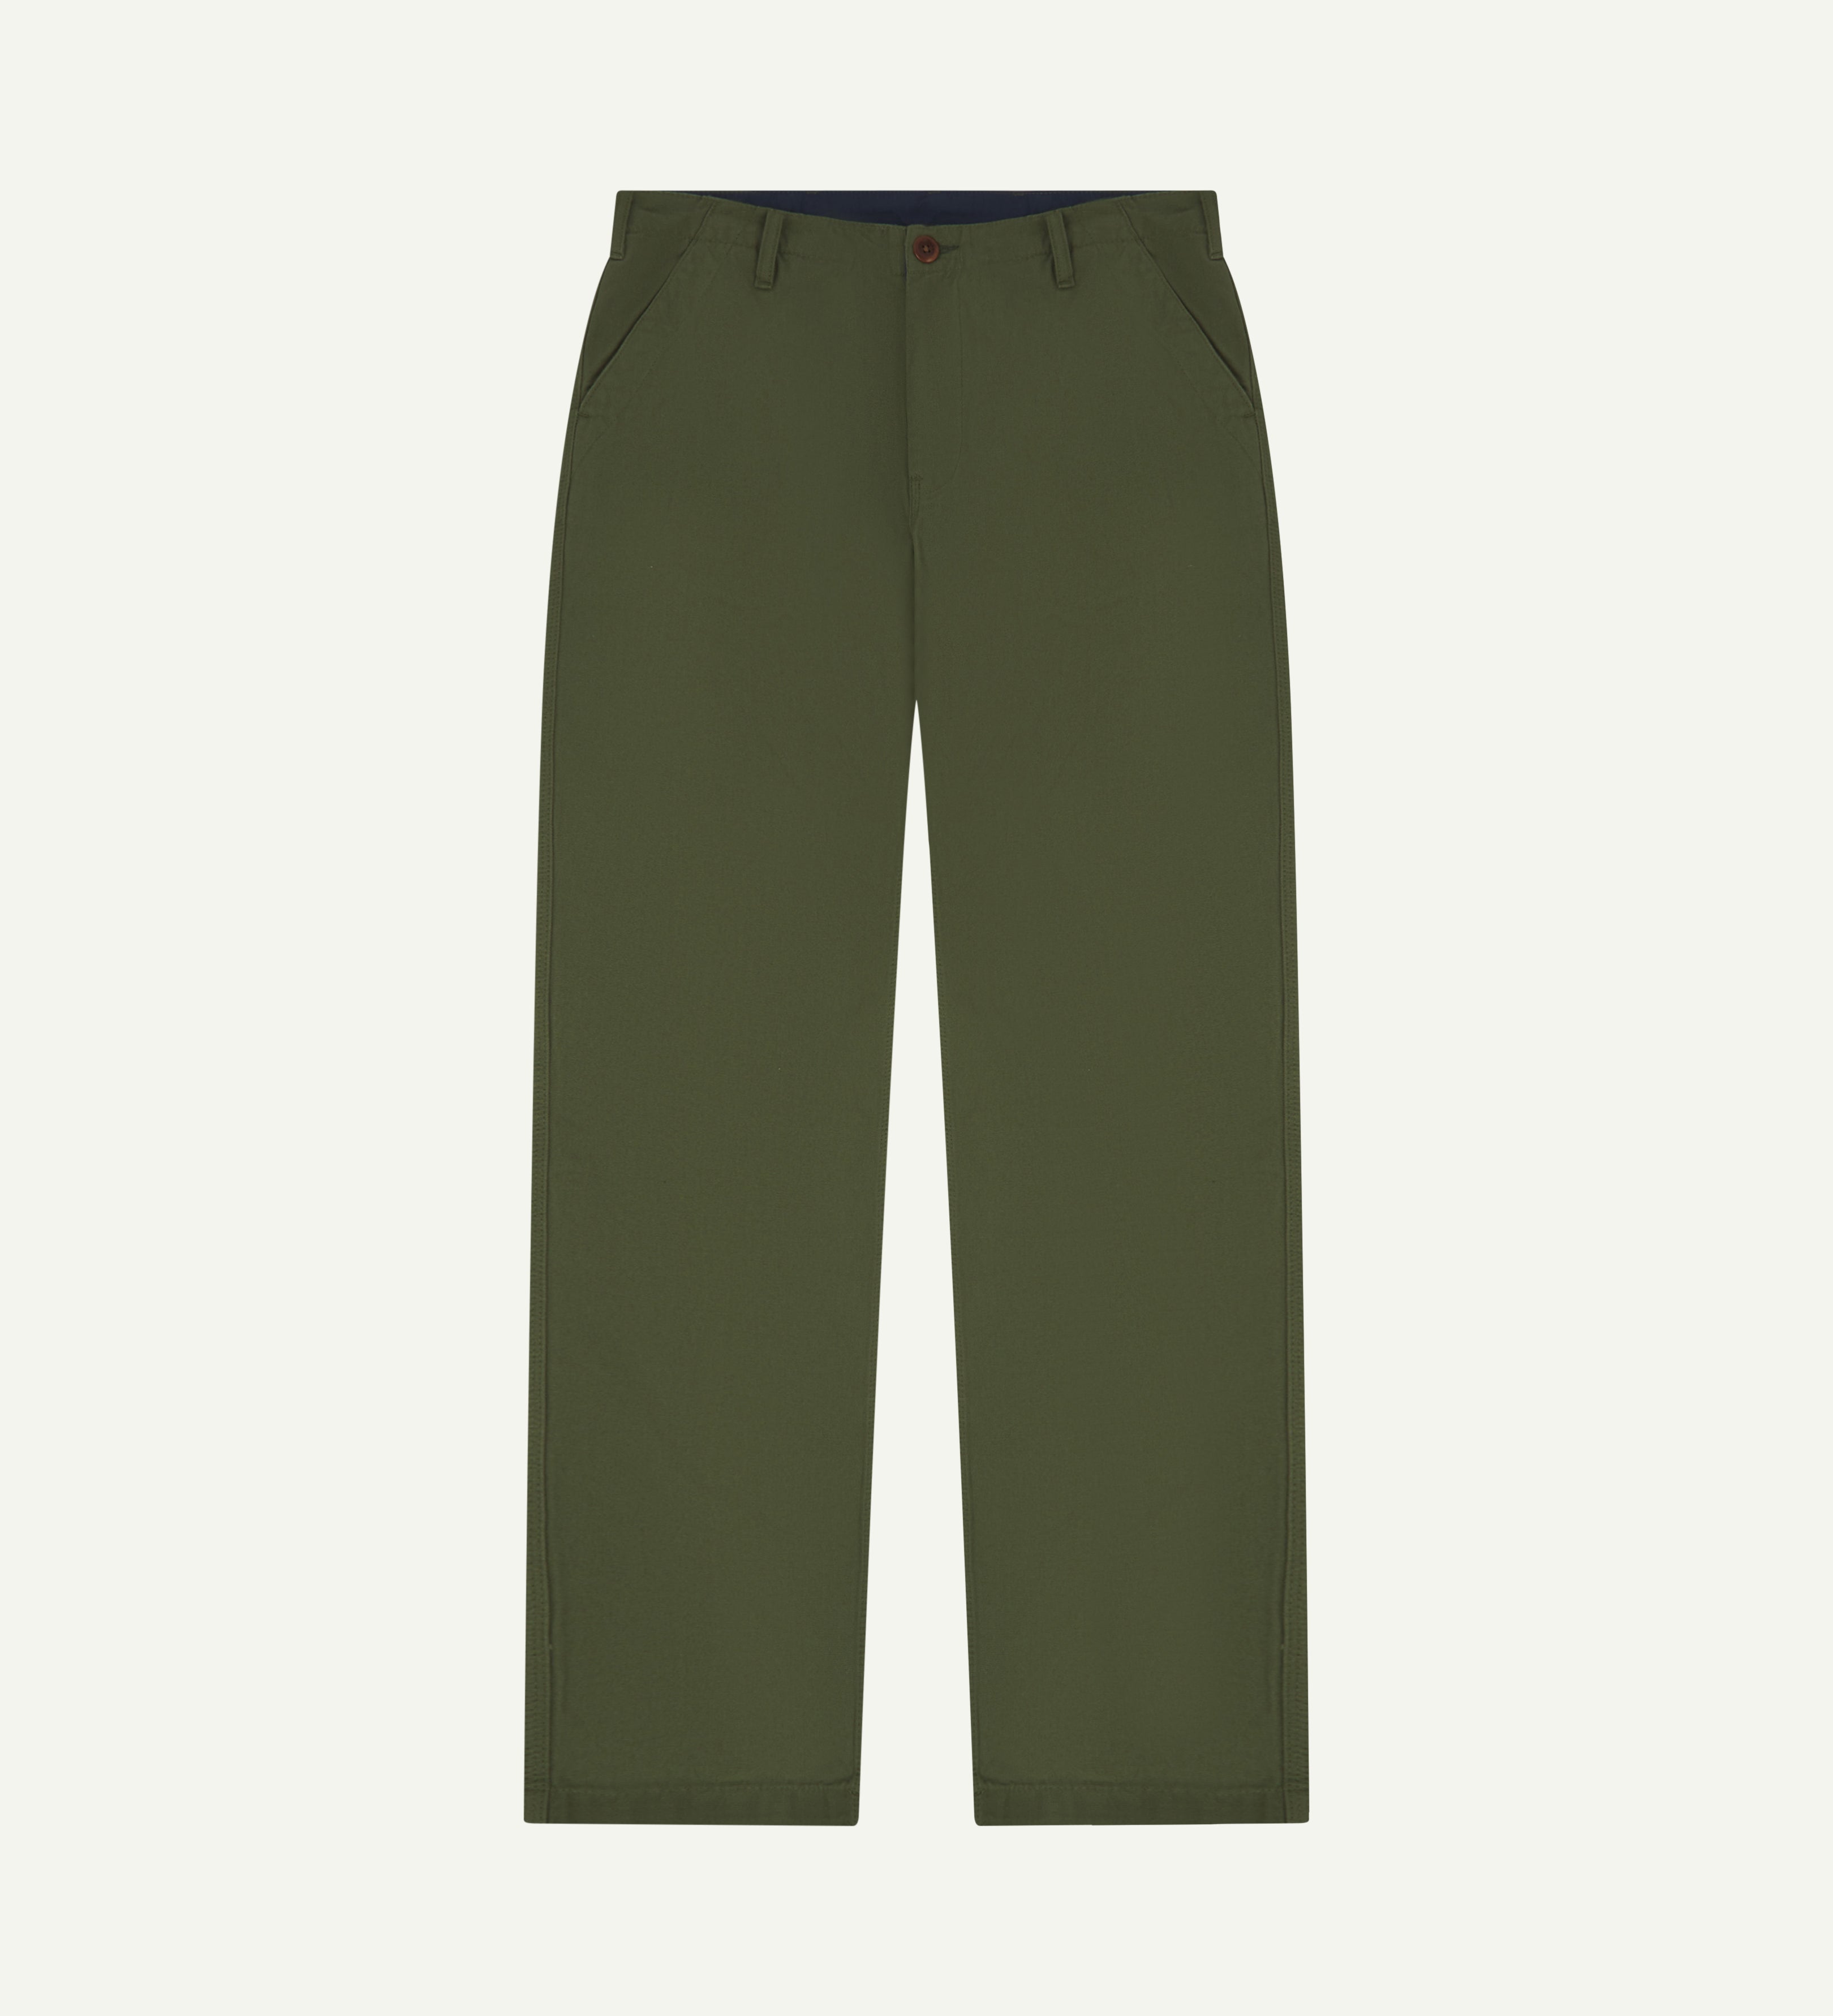 Flat view of #5005 Uskees organic cotton mid-green men's trousers on white background.